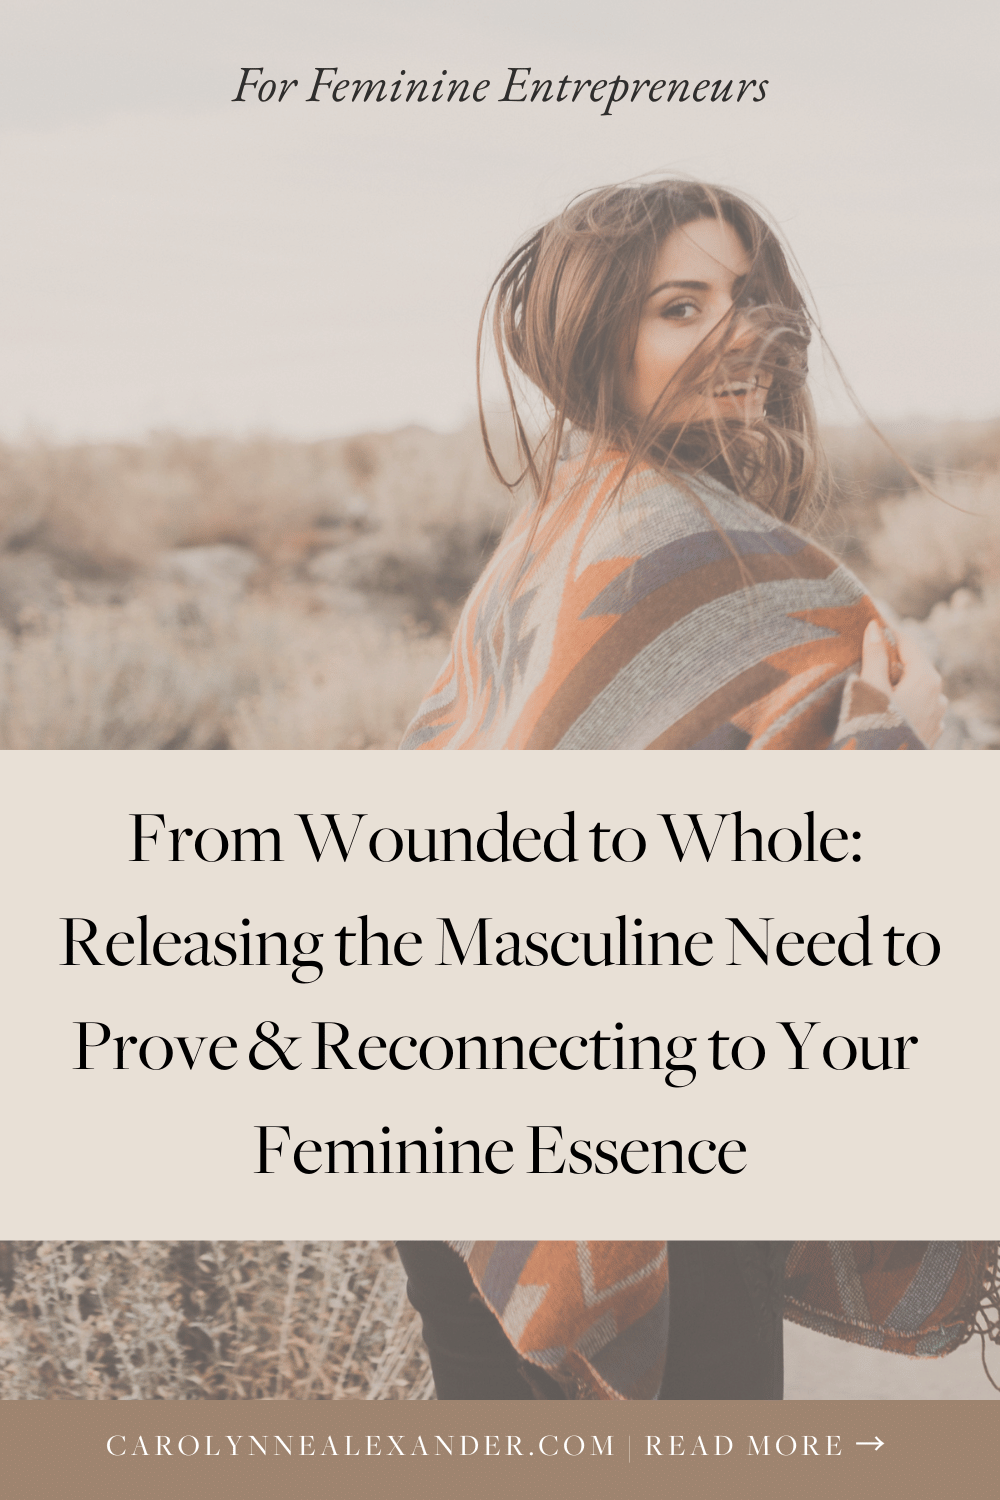 From Wounded to Whole Releasing the Masculine Need to Prove & Reconnecting to Your Feminine Essence by Carolynne Alexander Feminine Business